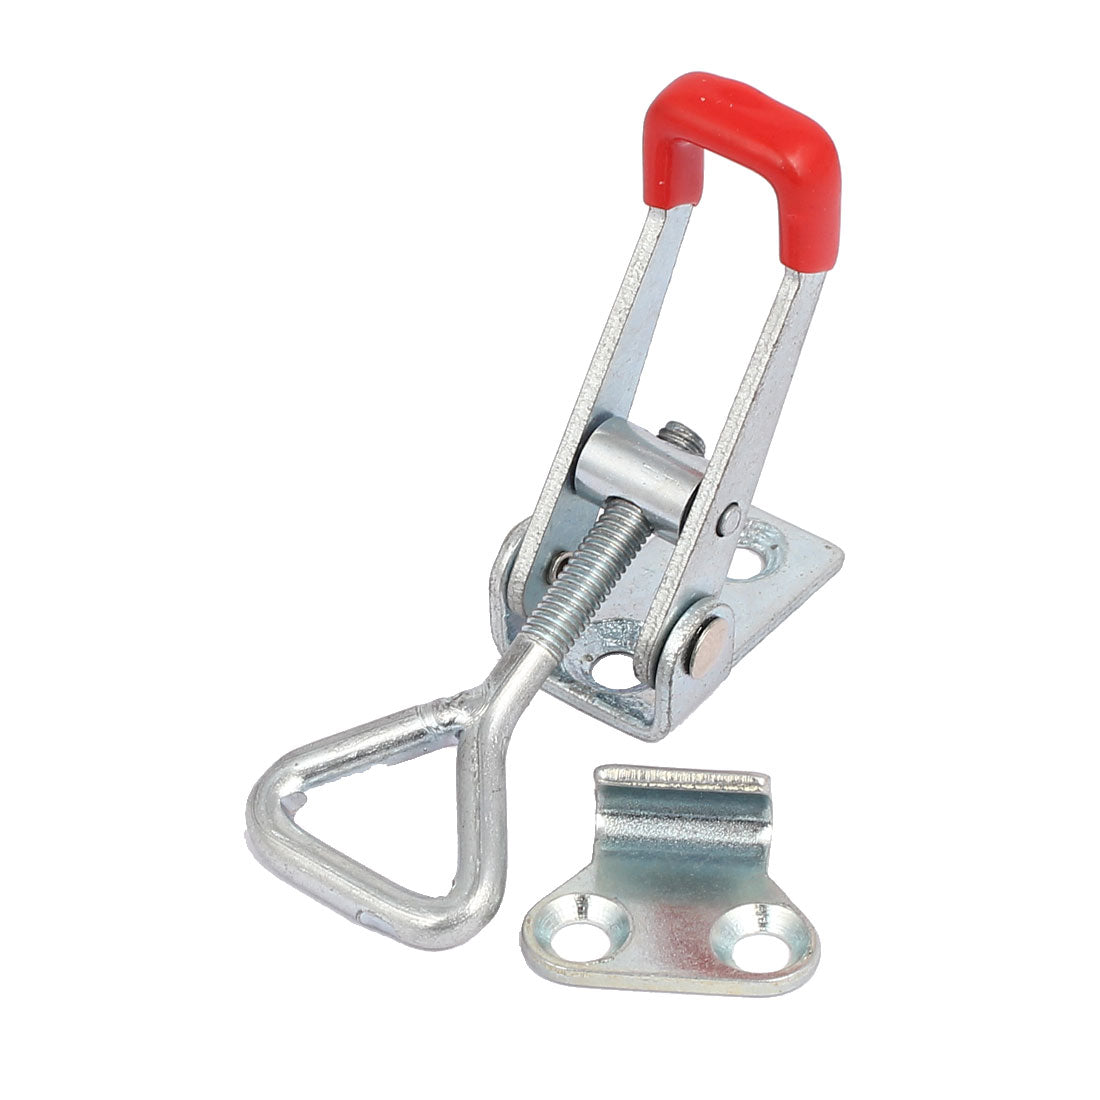 Uxcell Uxcell 4001 Carbon Steel Zinc Plated 100kg Holding Capacity Toggle Clamp Latch Hardware Fitting